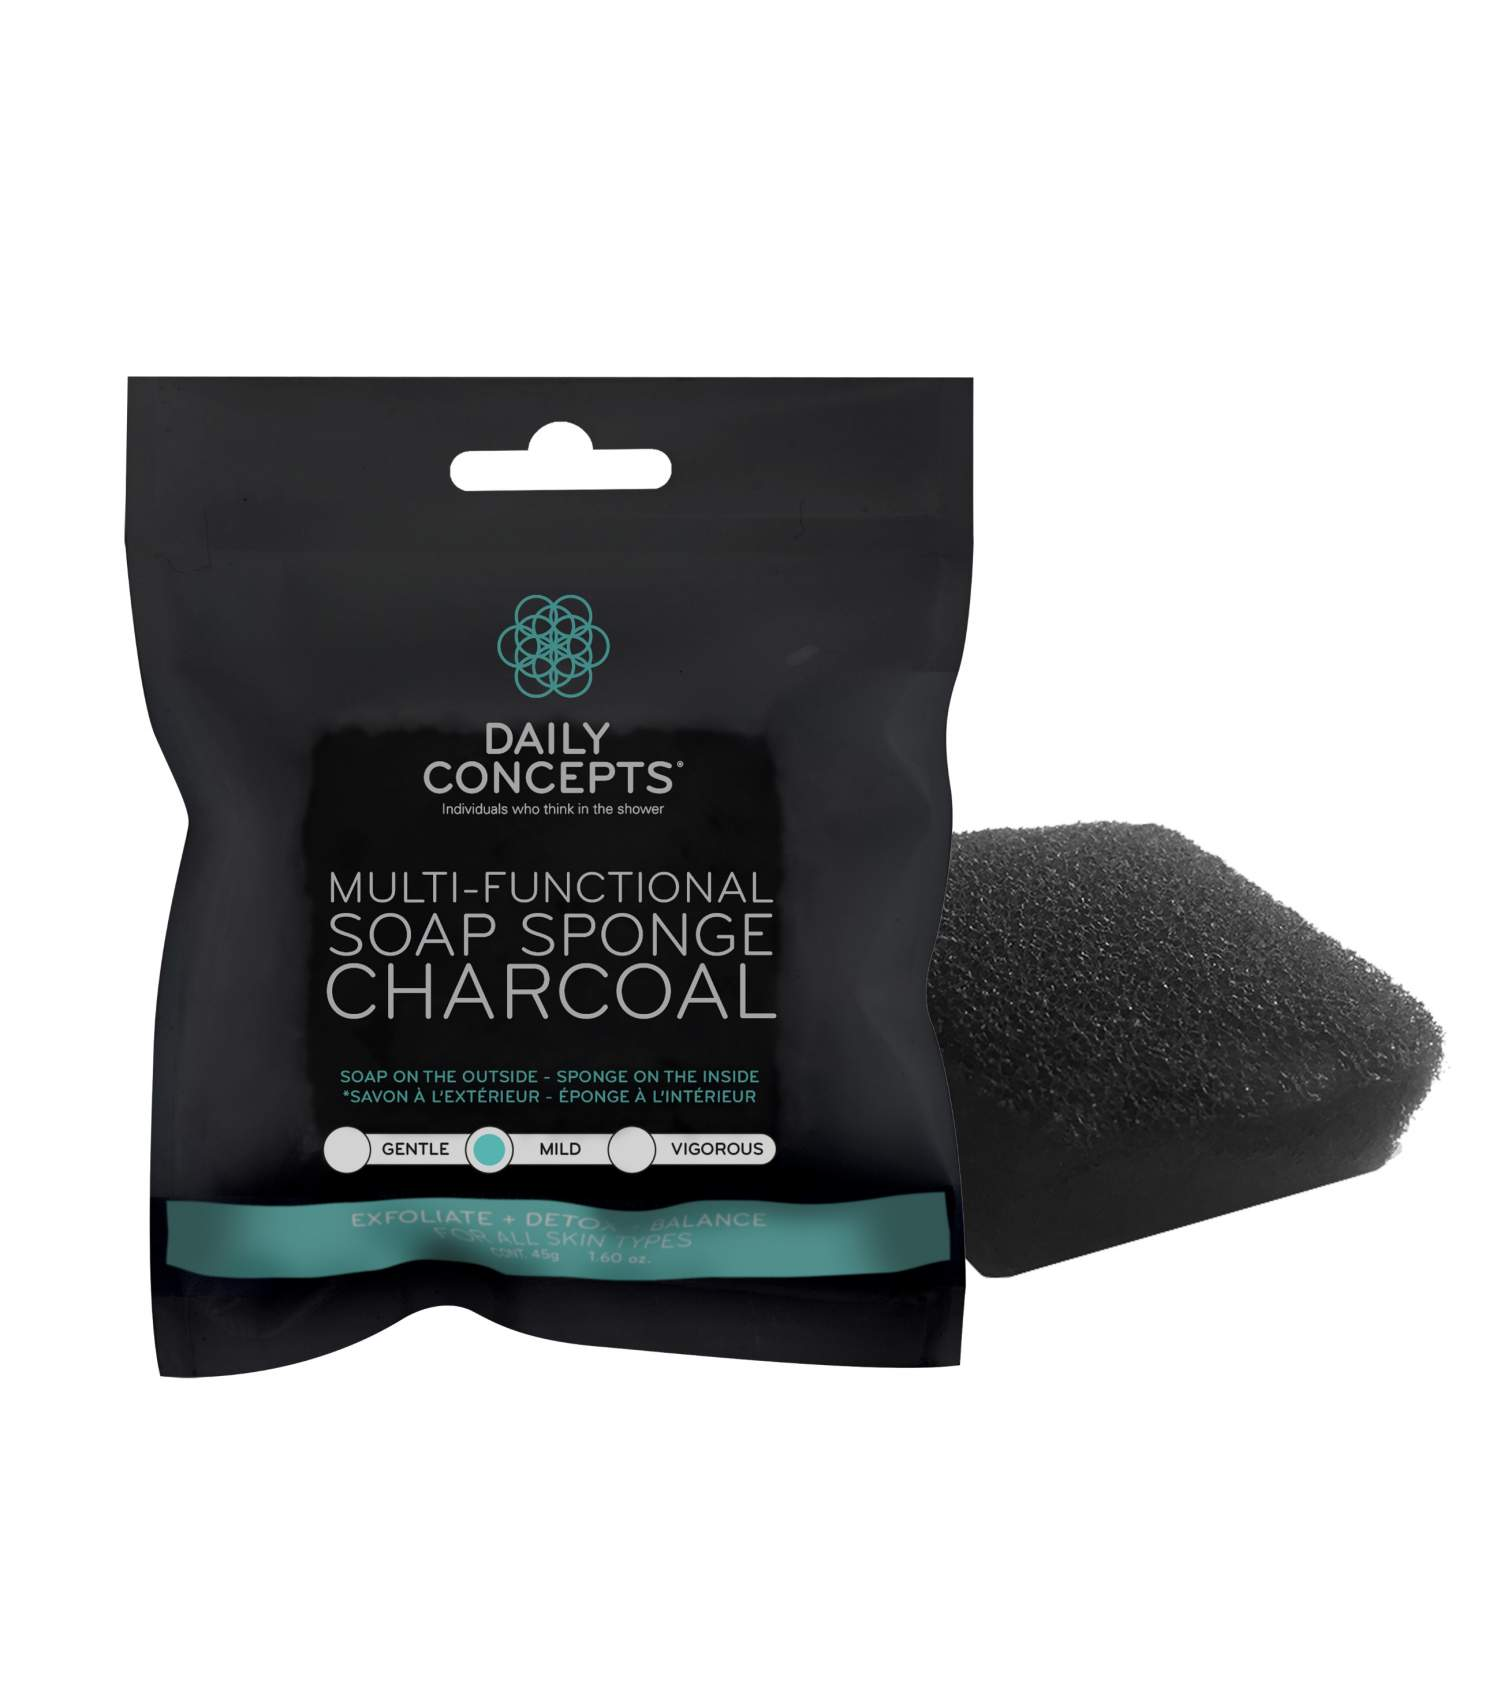 Multi-Functional Soap Sponge Charcoal Daily Concepts Multi-Functional Soap Sponge Charcoal 1